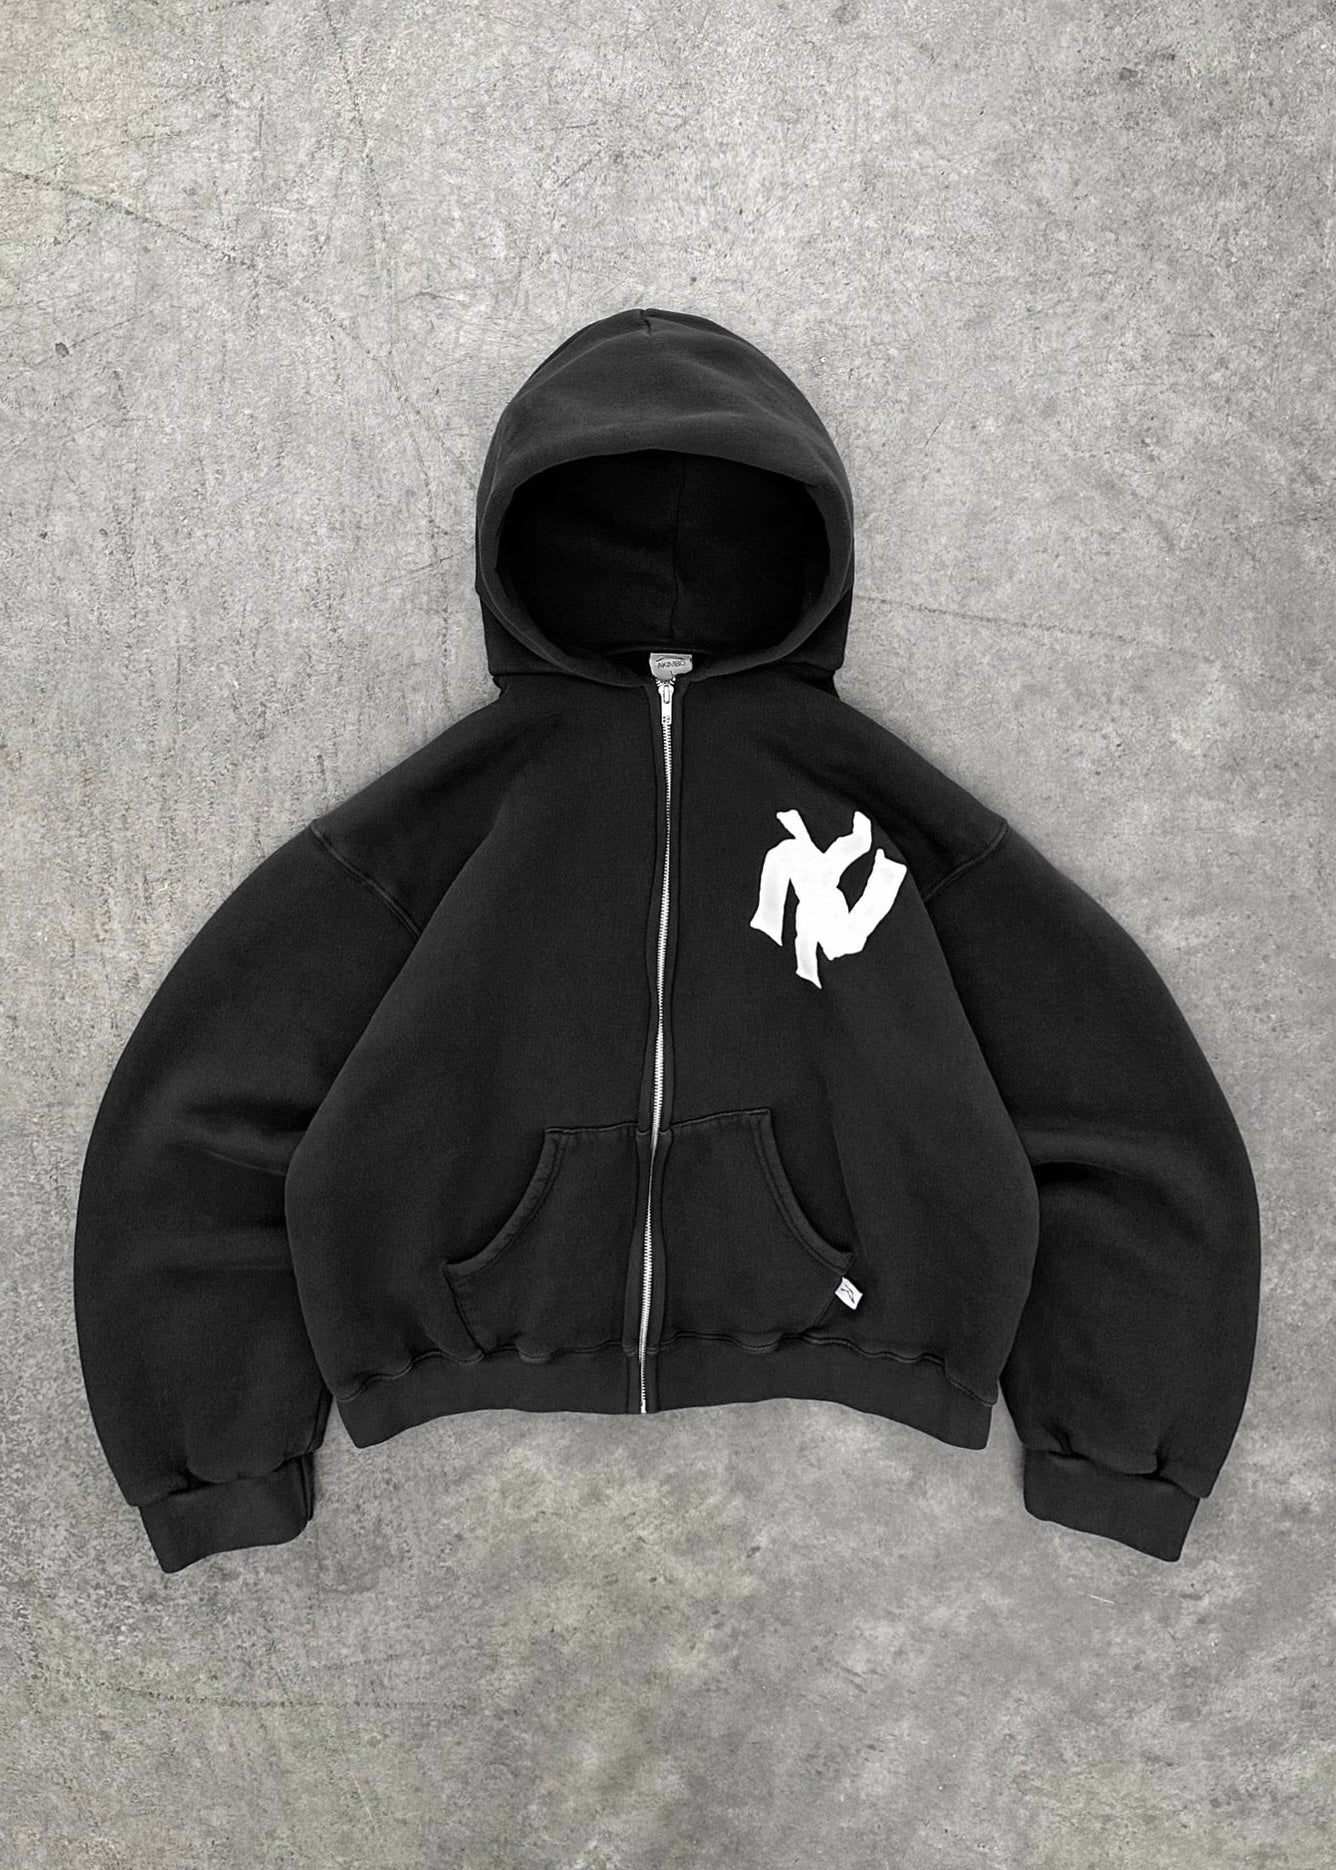 "NY NOODLE" AKIMBO ZIP-UP HOODIE - FADED BLACK